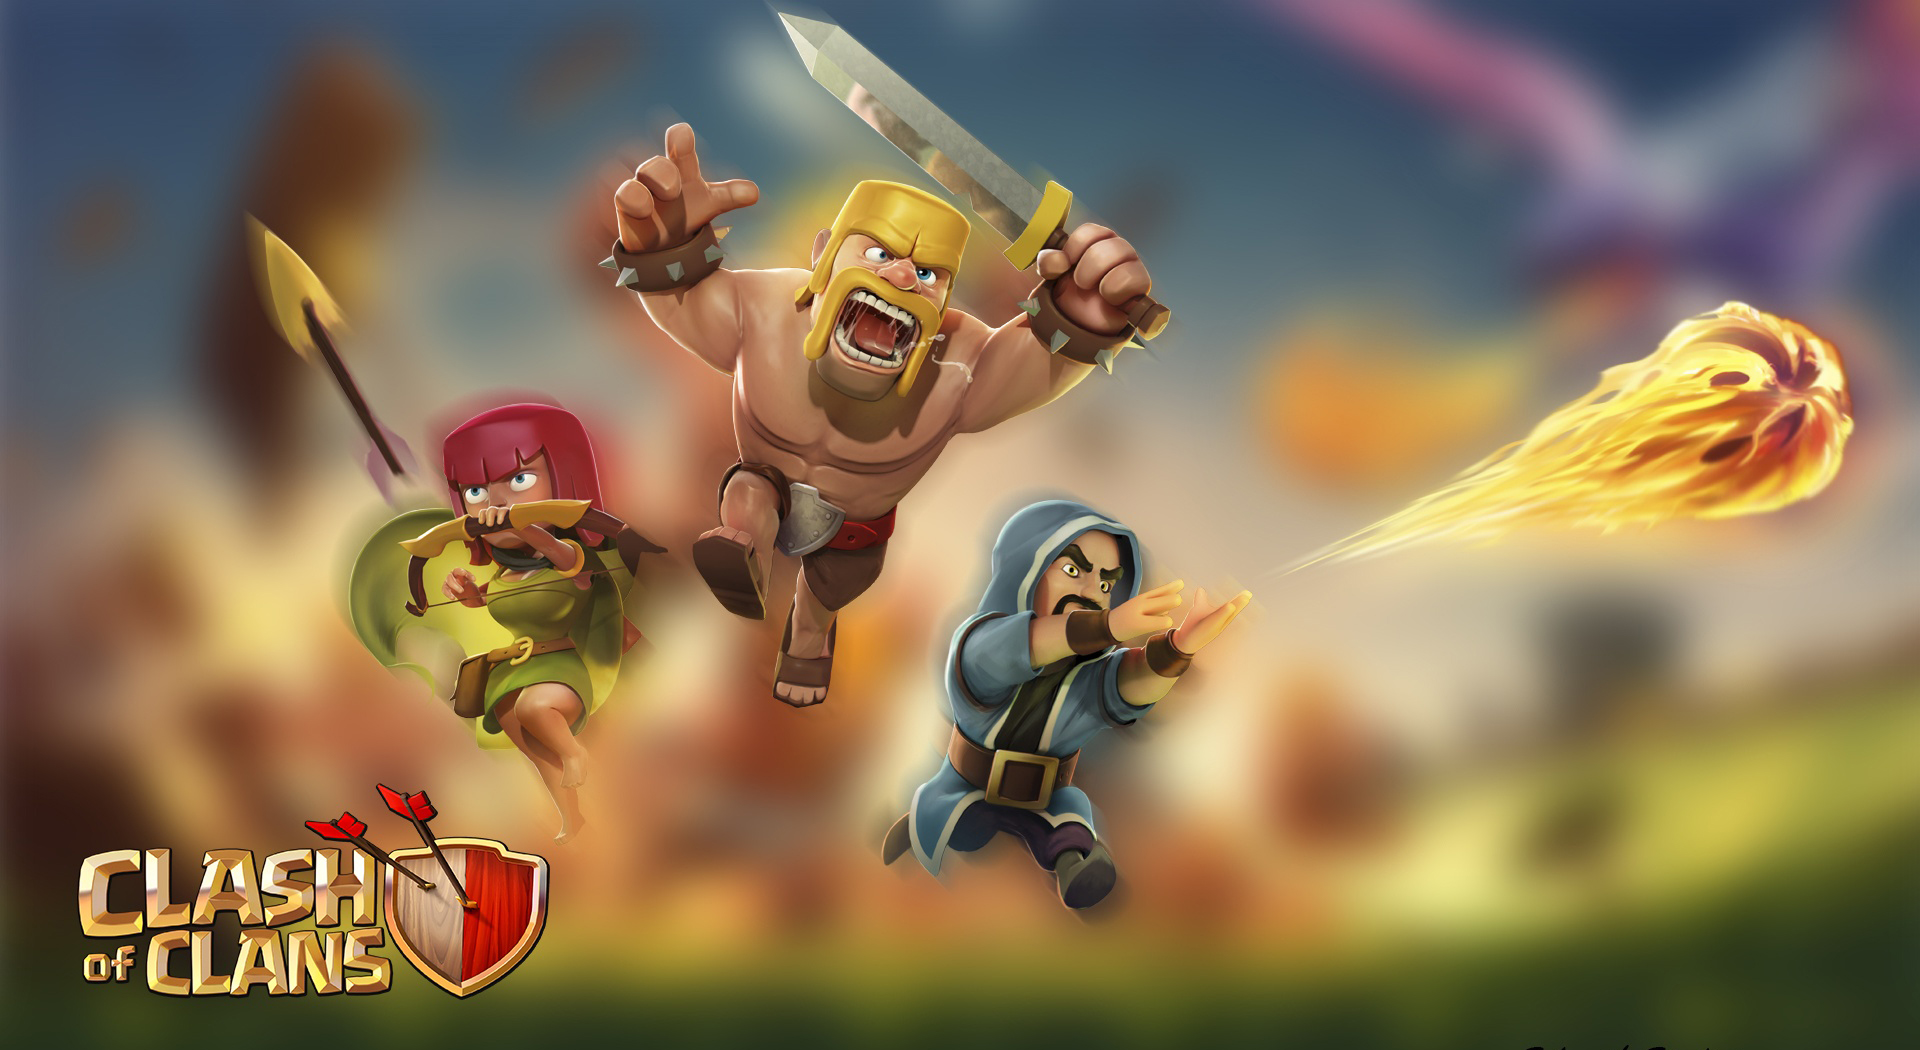 1920x1920 clash of clans new wallpapers full hd | Clash royale wallpaper,  Clash royale, Clash royale drawings